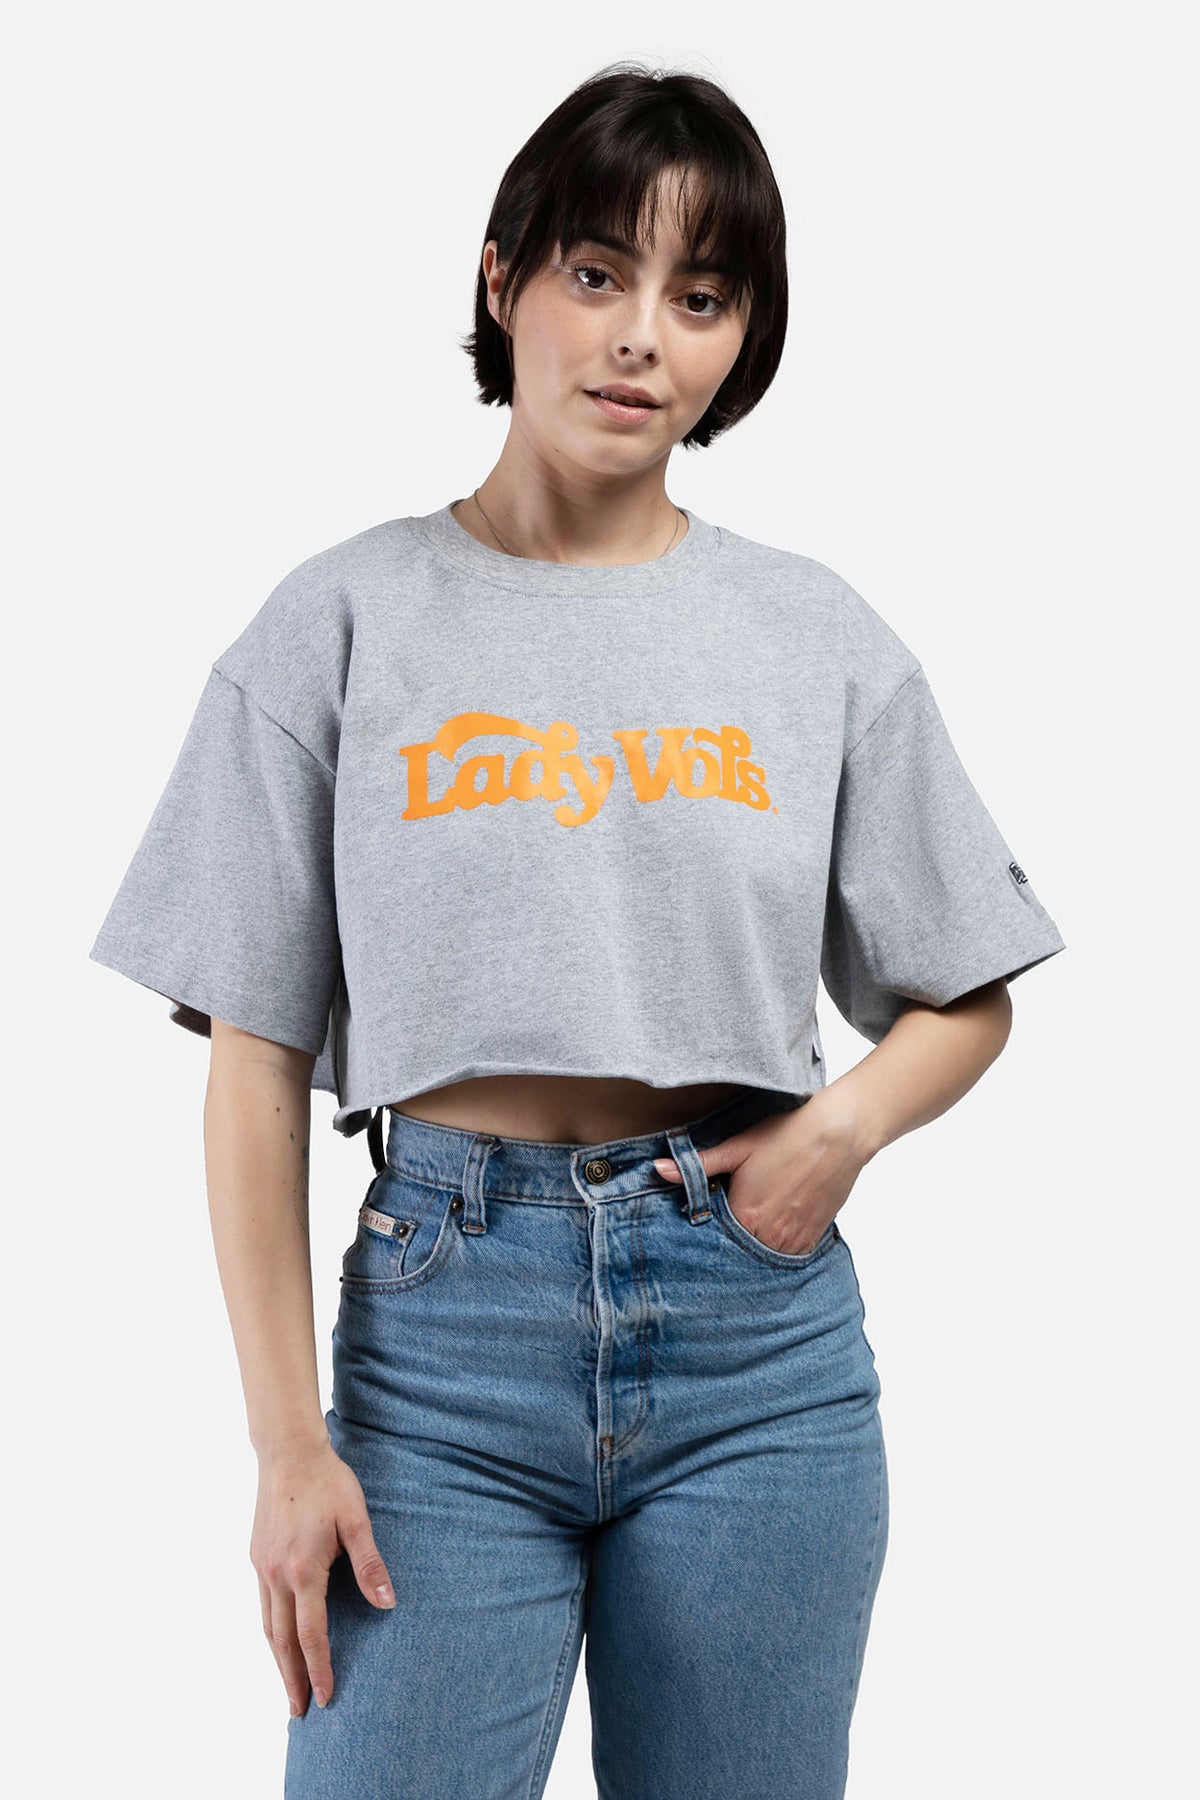 Lady Vols Tennessee Track Top